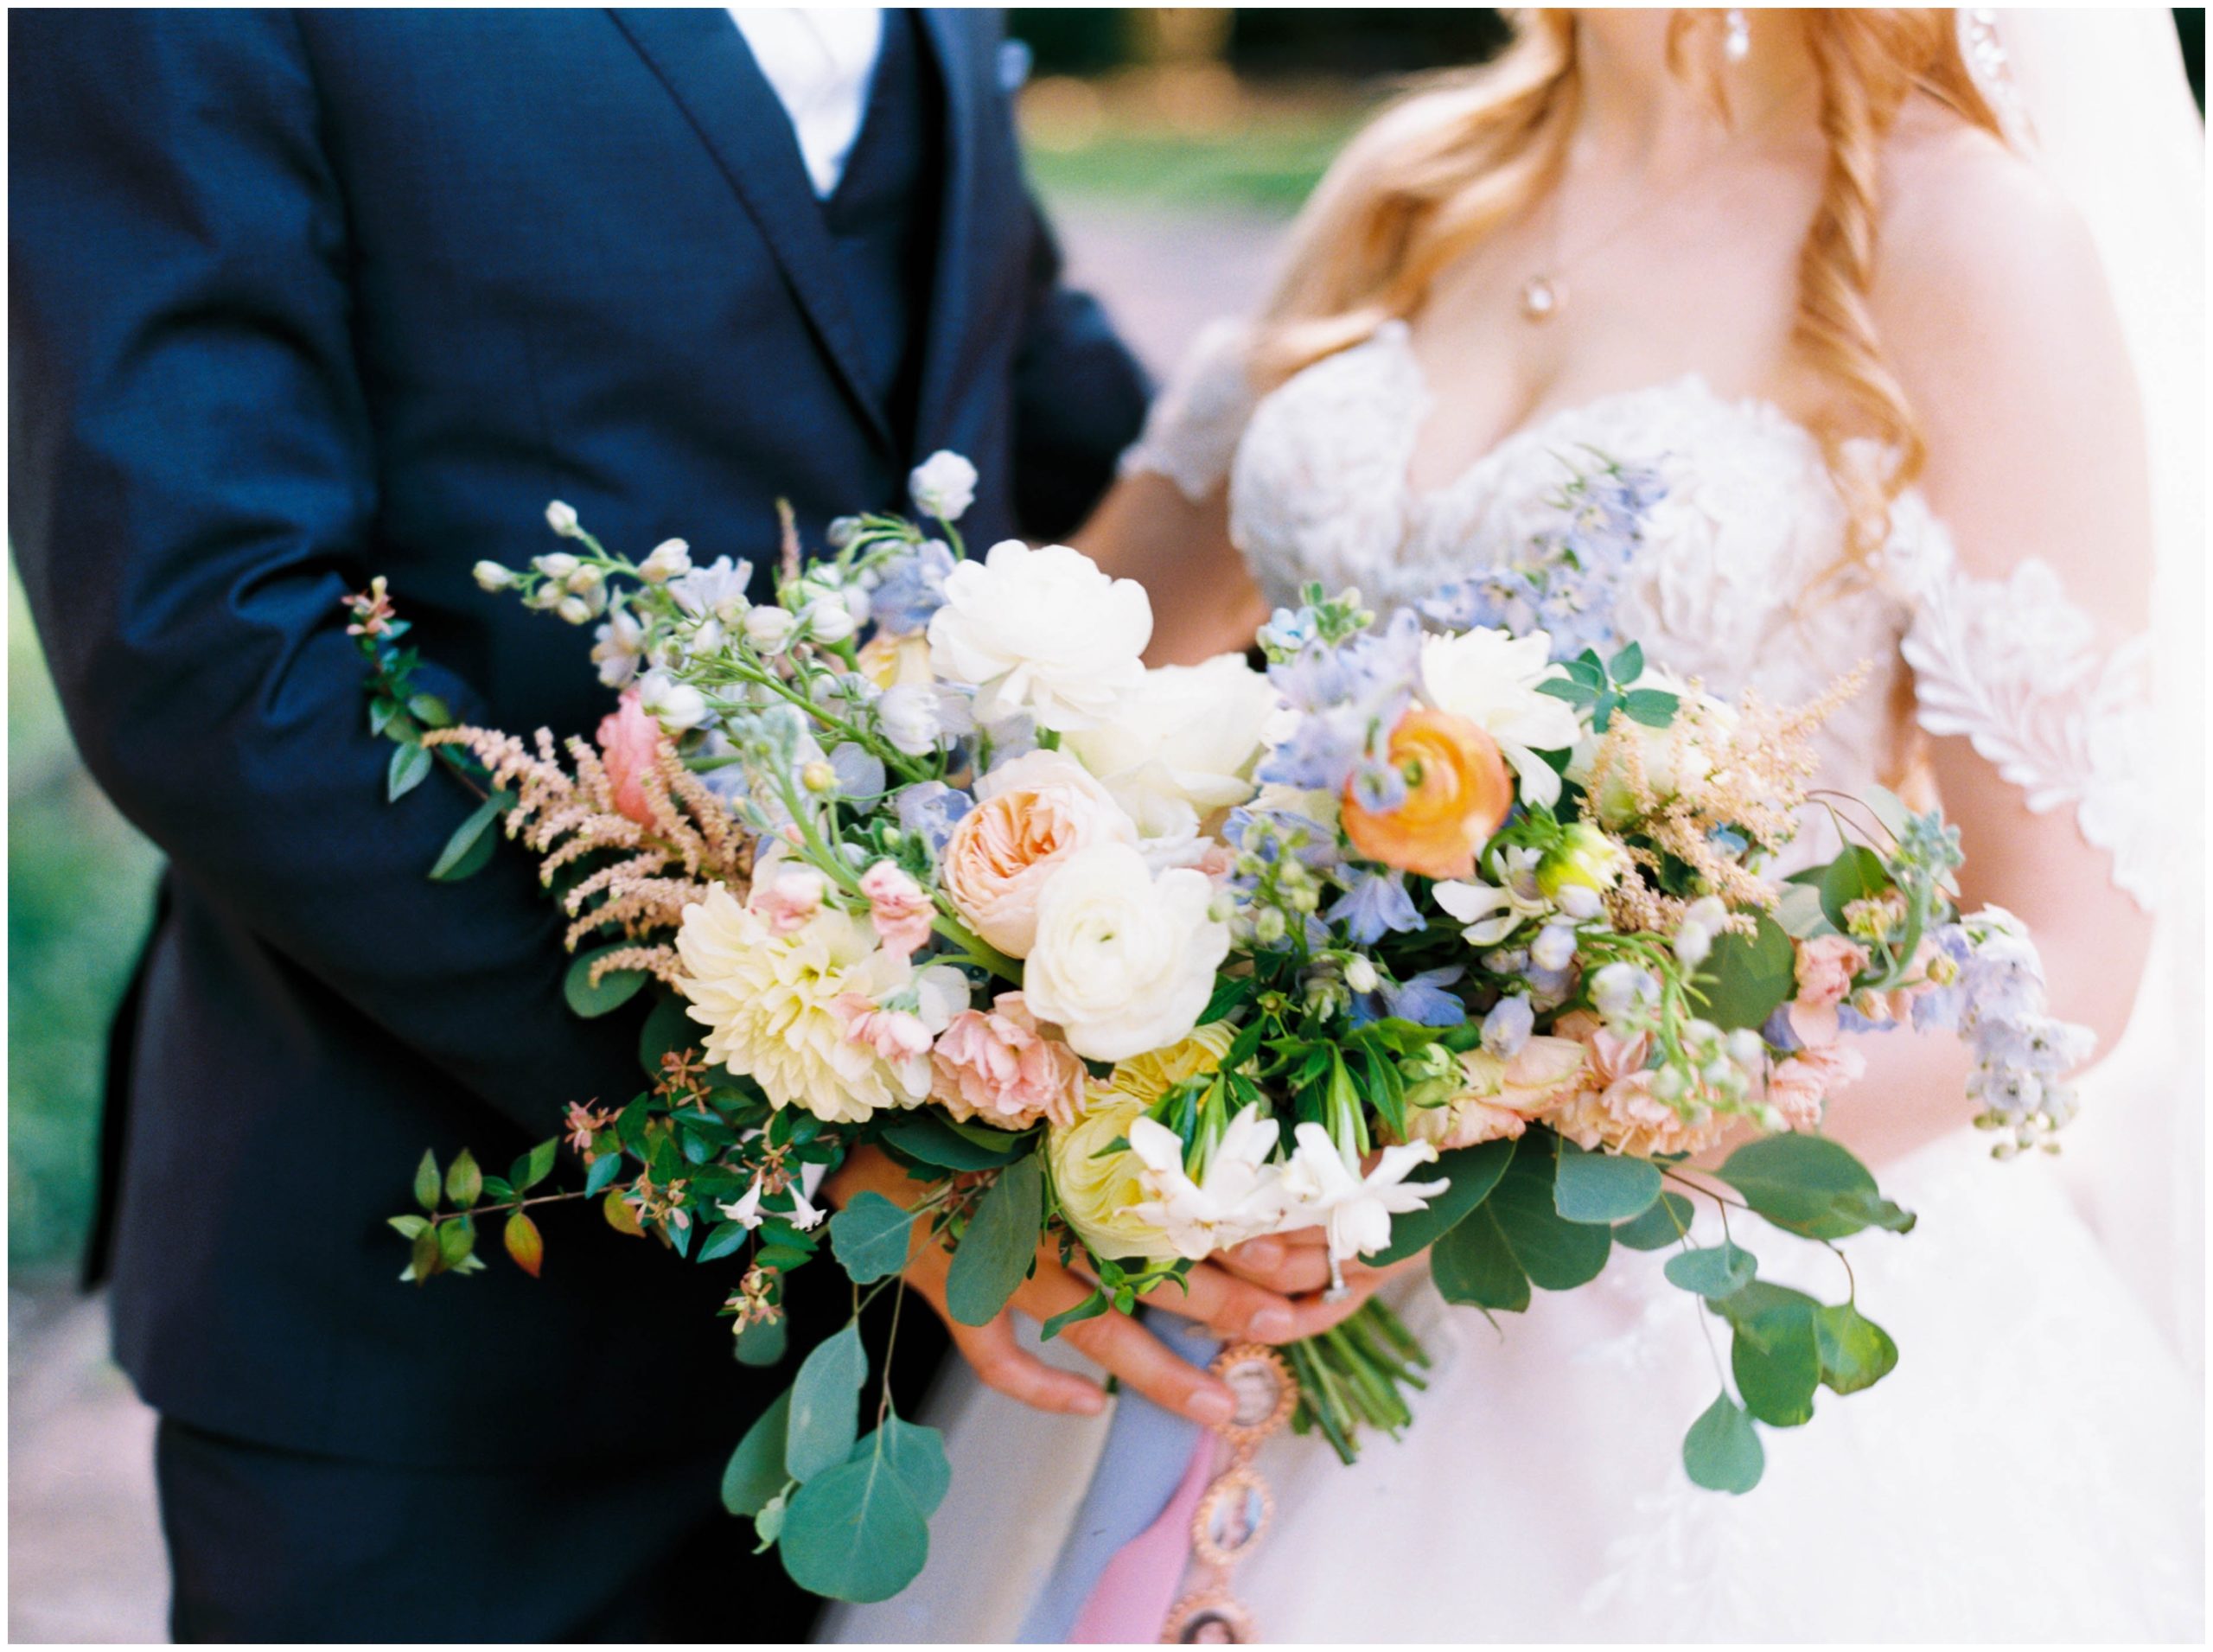 Bridal bouquet filled with white and peach roses, white dahlia, and blue delphinium by Once Gathered